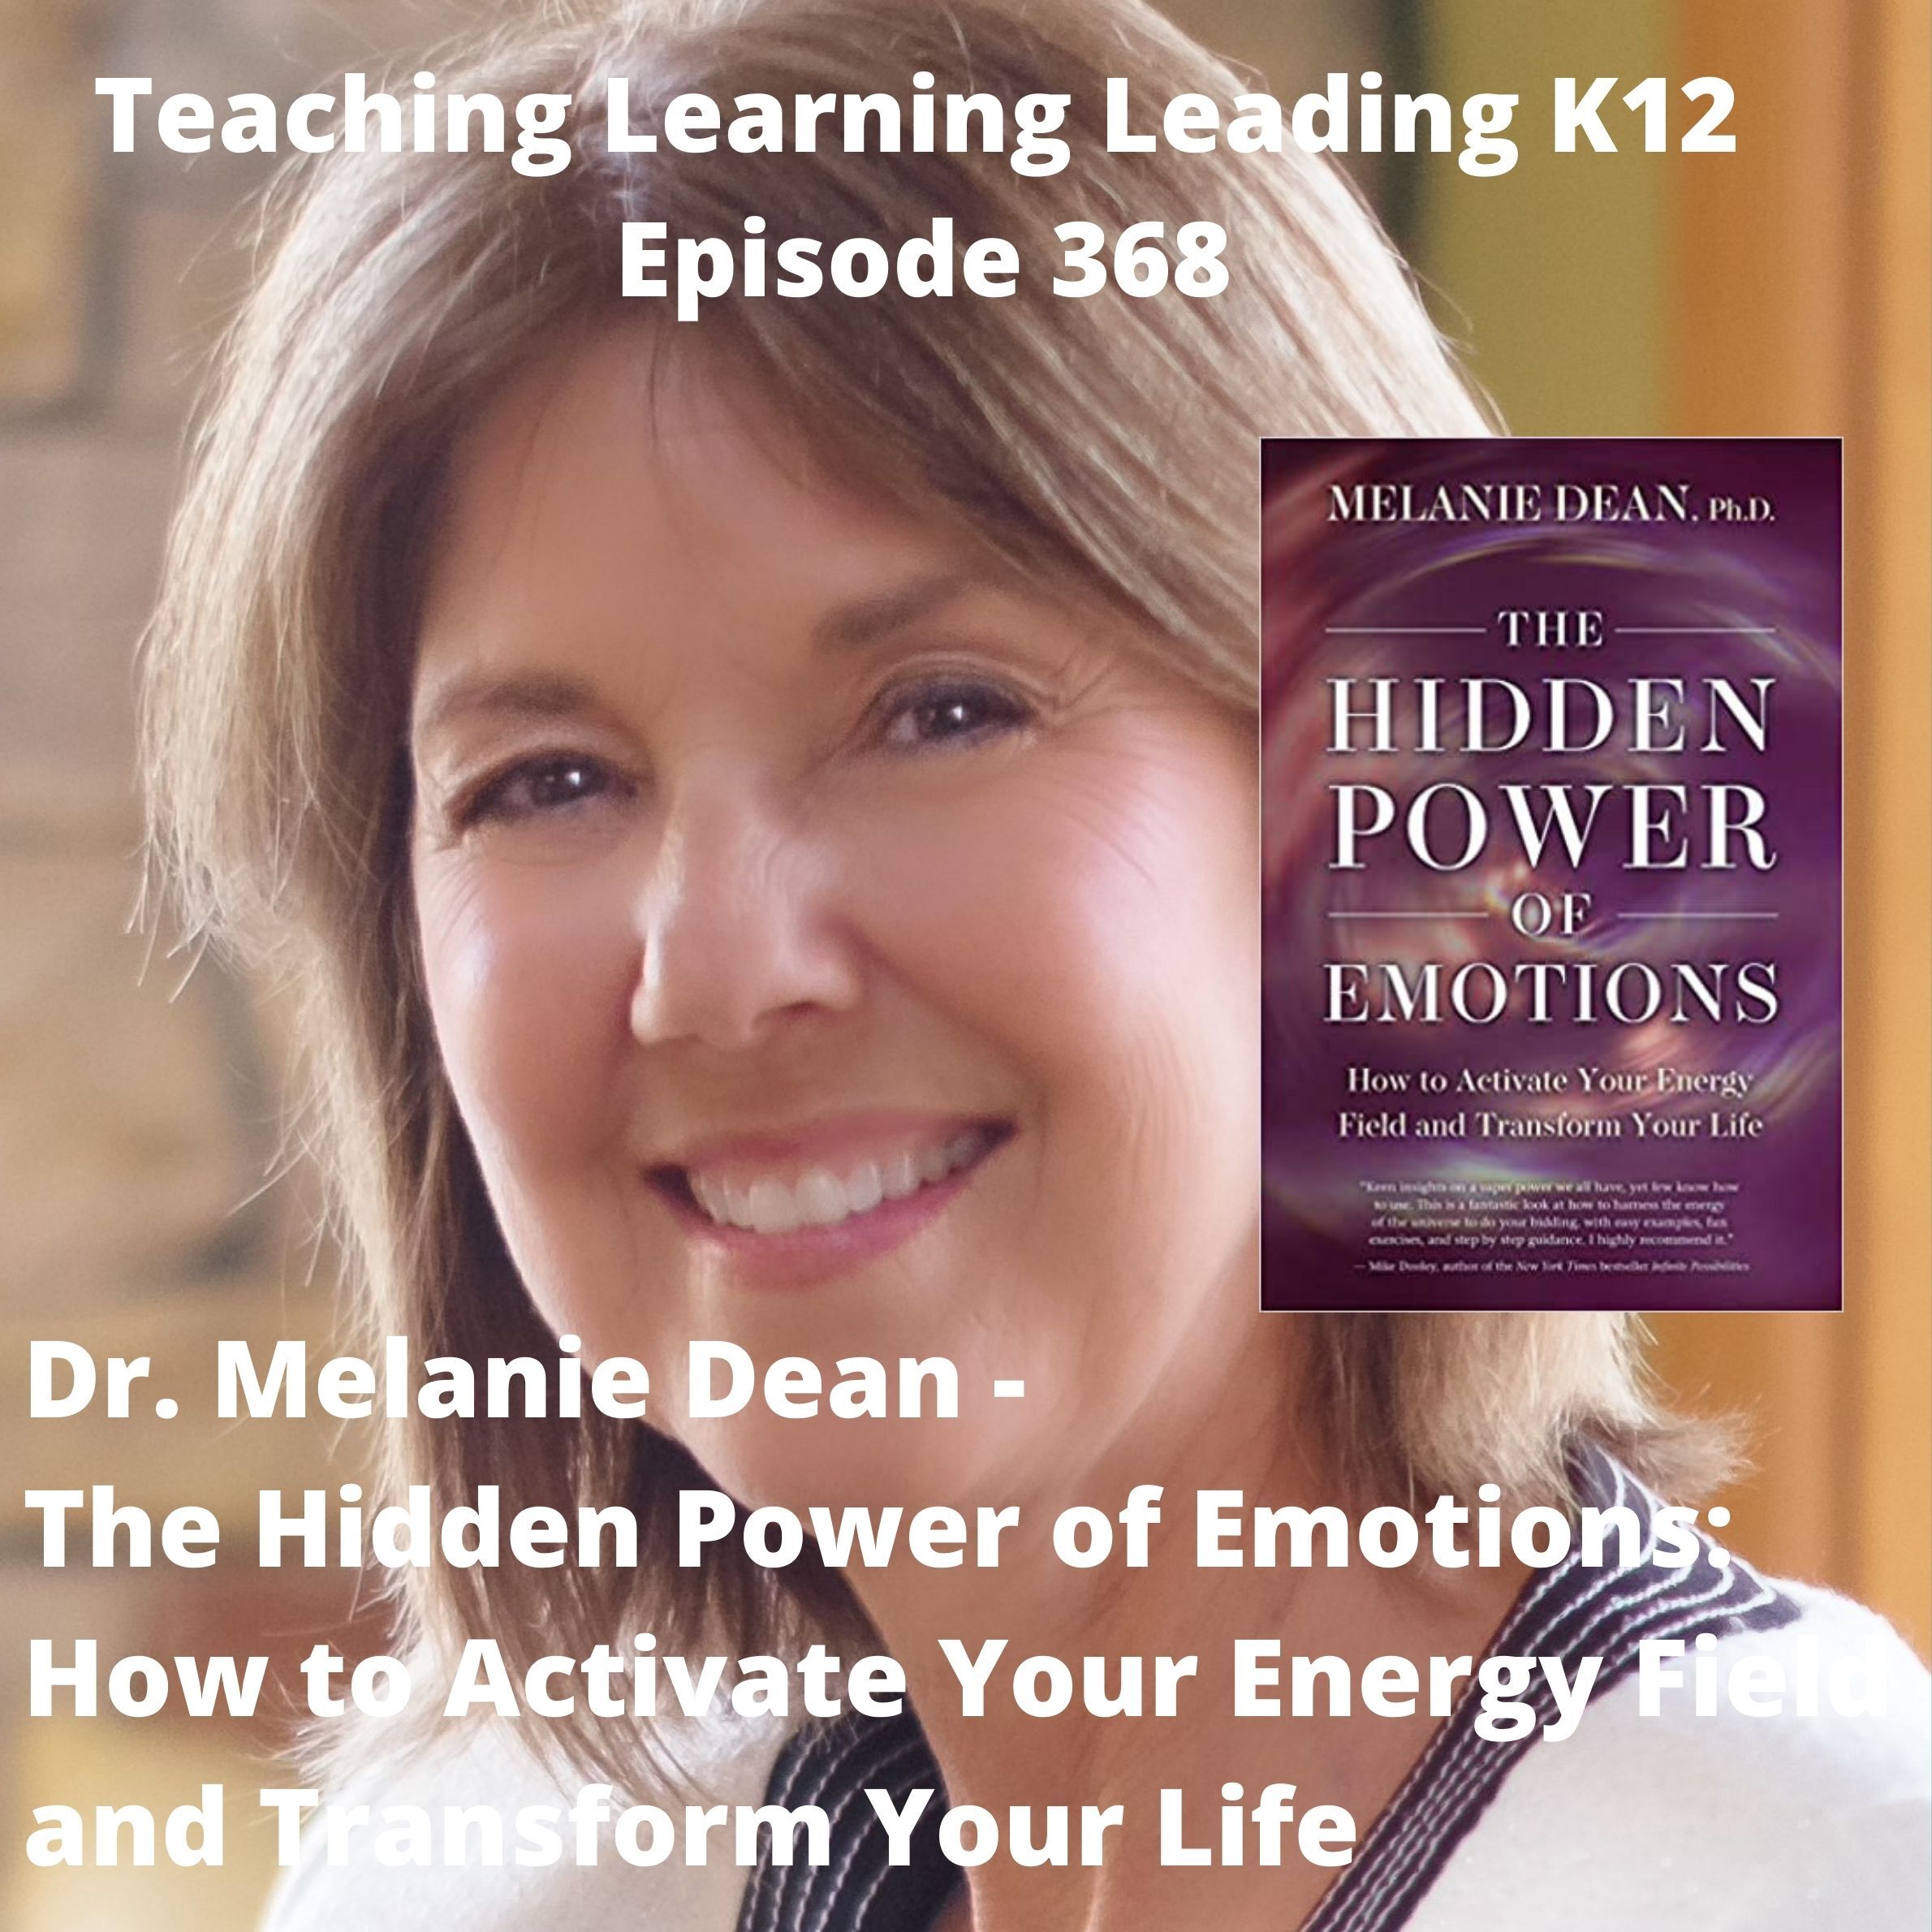 Dr. Melanie Dean - The Hidden Power of Emotions: How to Activate Your Energy Field and Transform Your Life - 368 Image